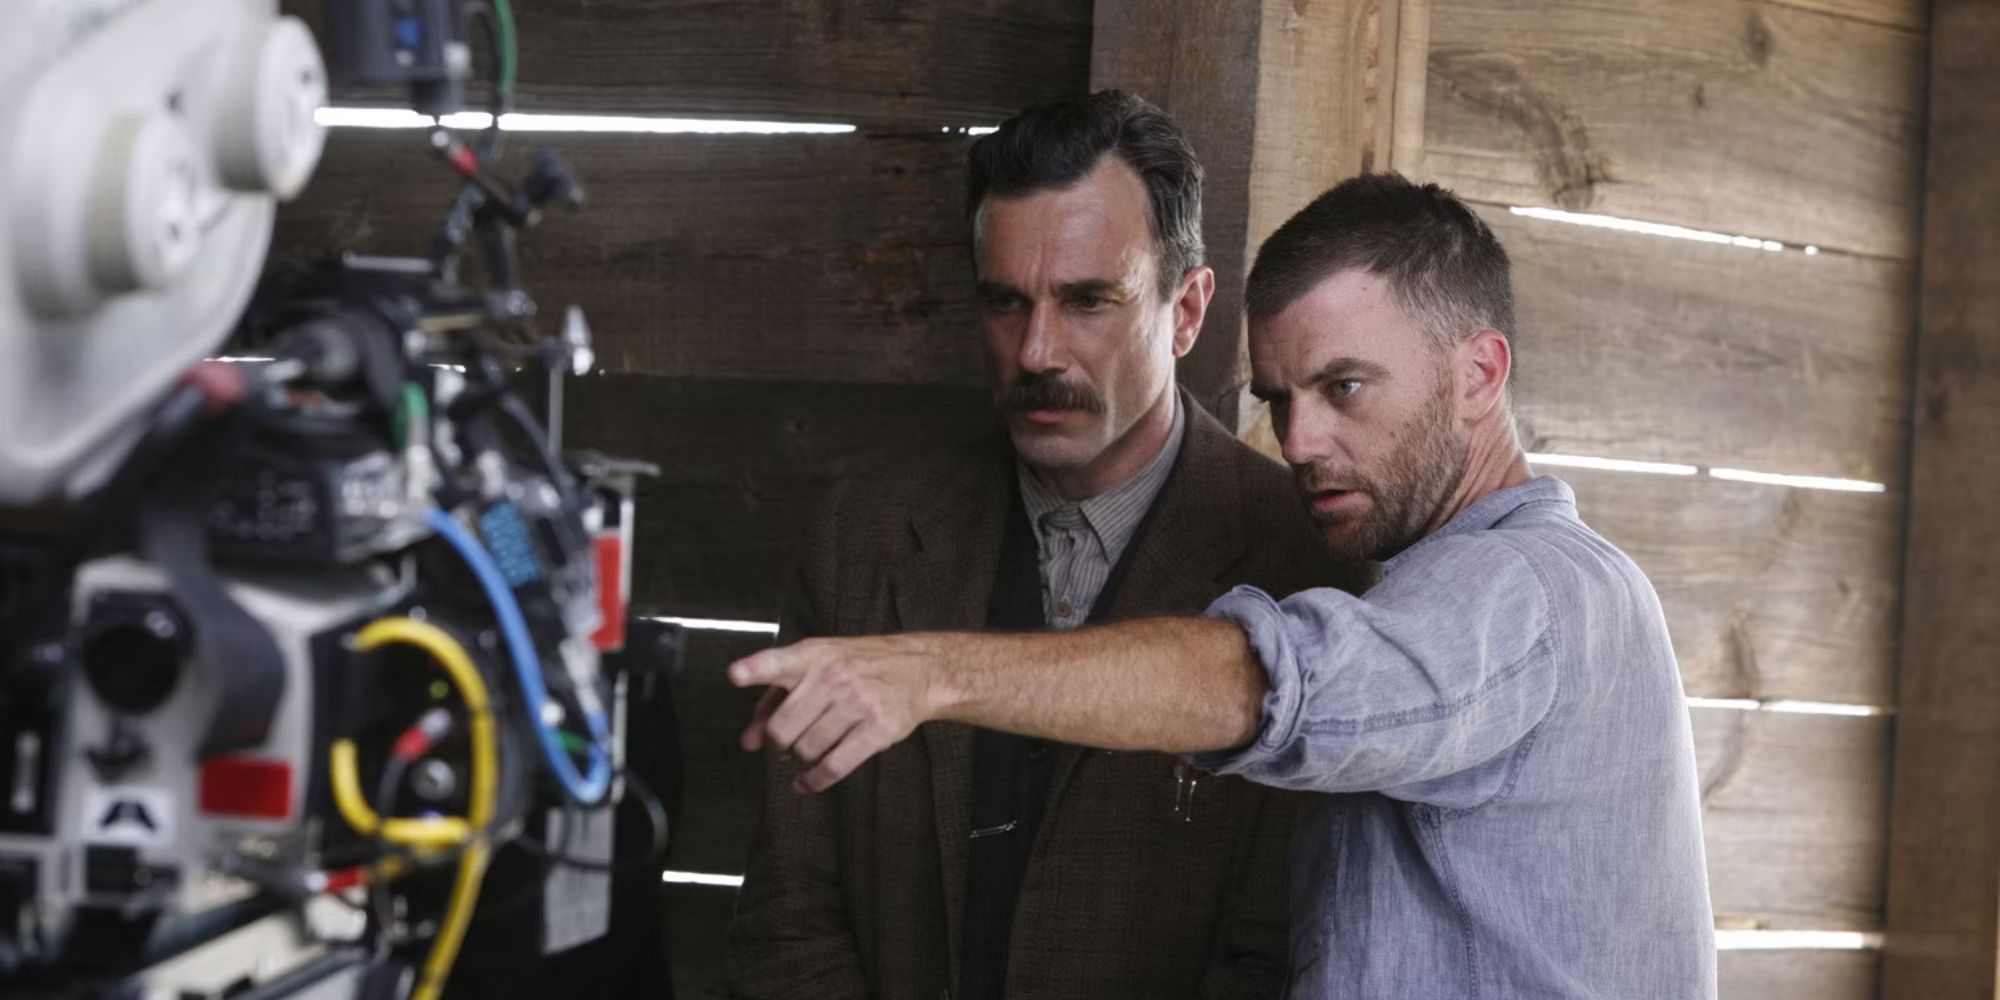 Paul Thomas Anderson directing There Will Be Blood alongside Daniel Day-Lewis